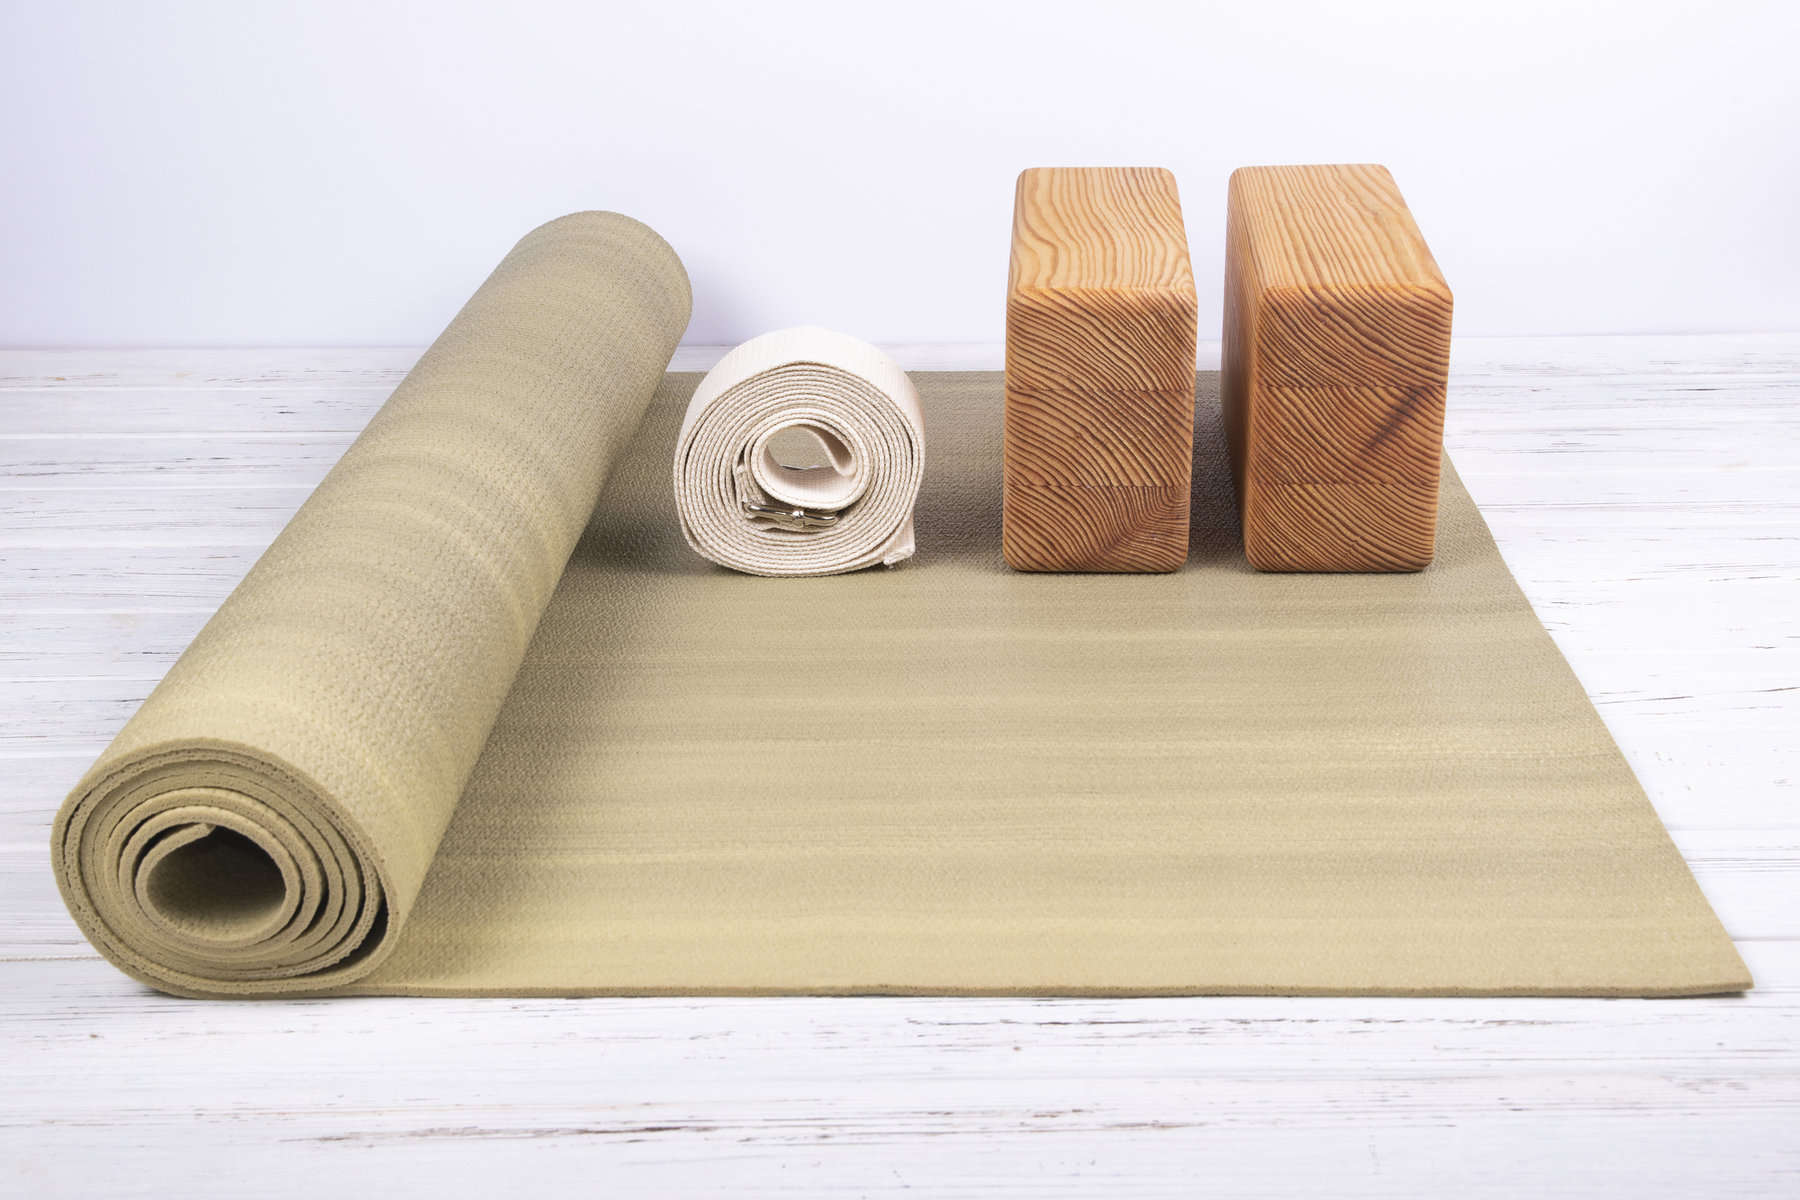 A light brown yoga mat rolled up halfway with two brown yoga blocks and a beige yoga strap placed on top.